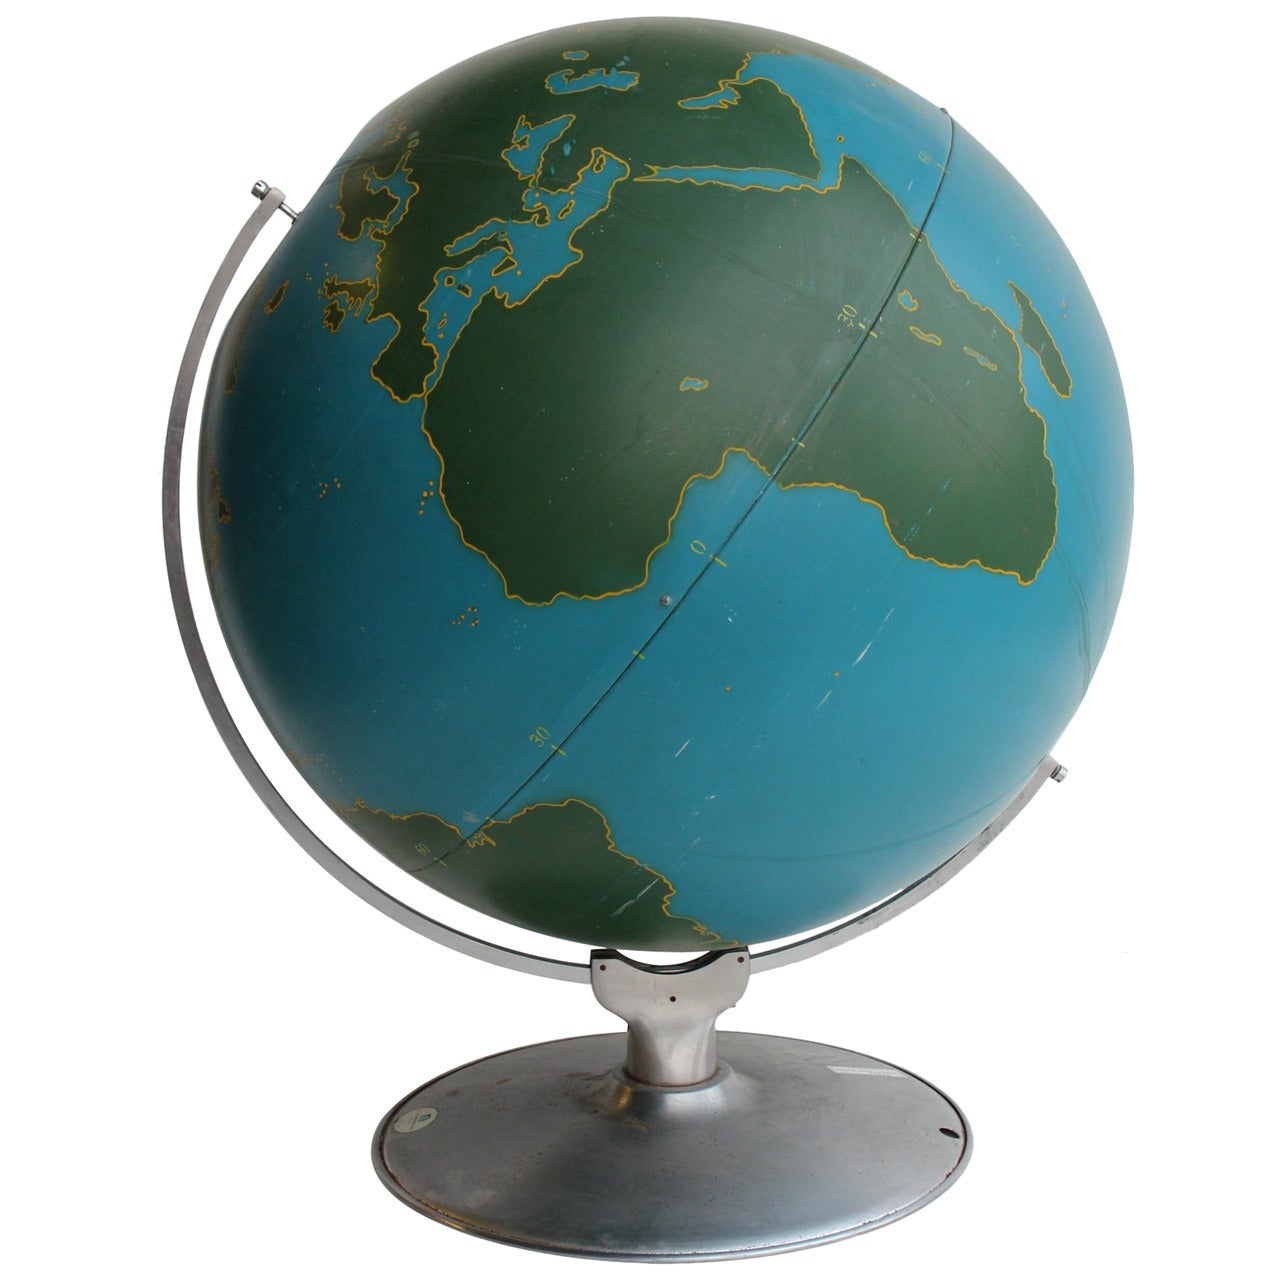 Oversized 1940s American Original Aviation World Globe by A.J. Nystrom & Co. For Sale